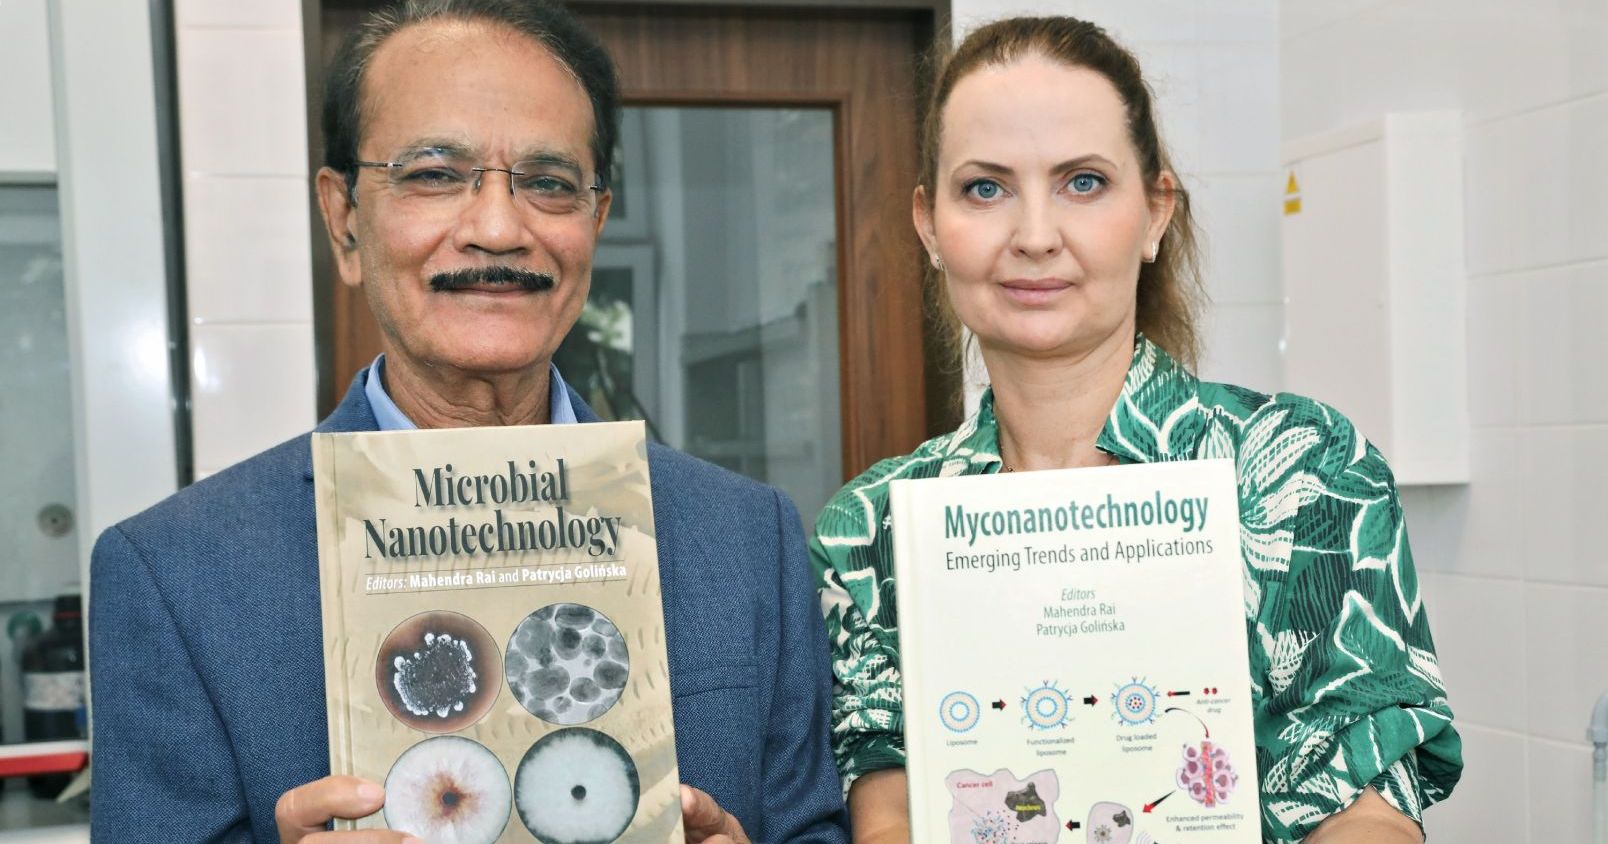 Prof. Mahendra Rai from Sant Gadge Baba Amravati University in India and dr hab. Patrycja Golińska, prof. NCU from Department of Microbiology, Faculty of Biological and Veterinary Sciences of NCU Prof. Mahendra Rai from Sant Gadge Baba Amravati University in India and dr hab. Patrycja Golińska, prof. NCU from Department of Microbiology, Faculty of Biological and Veterinary Sciences of NCU